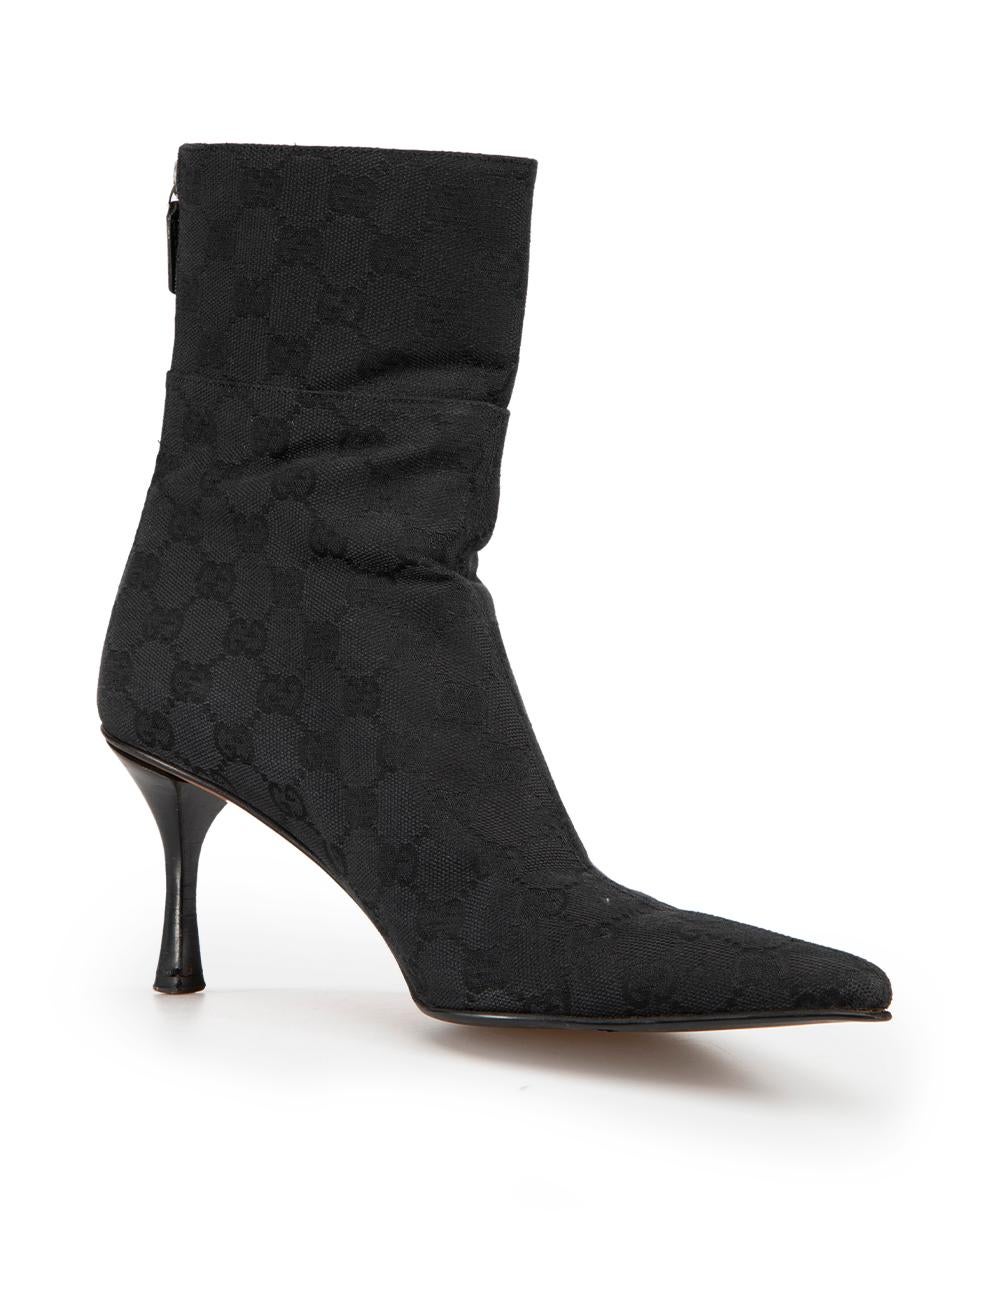 CONDITION is Very good. Minimal wear to boots is evident. Minimal wear to both heel-stems with scuffing on this used Gucci designer resale item. These boots come with original dust bag.



Details


Black

Canvas

Ankle boots

'GG' logo